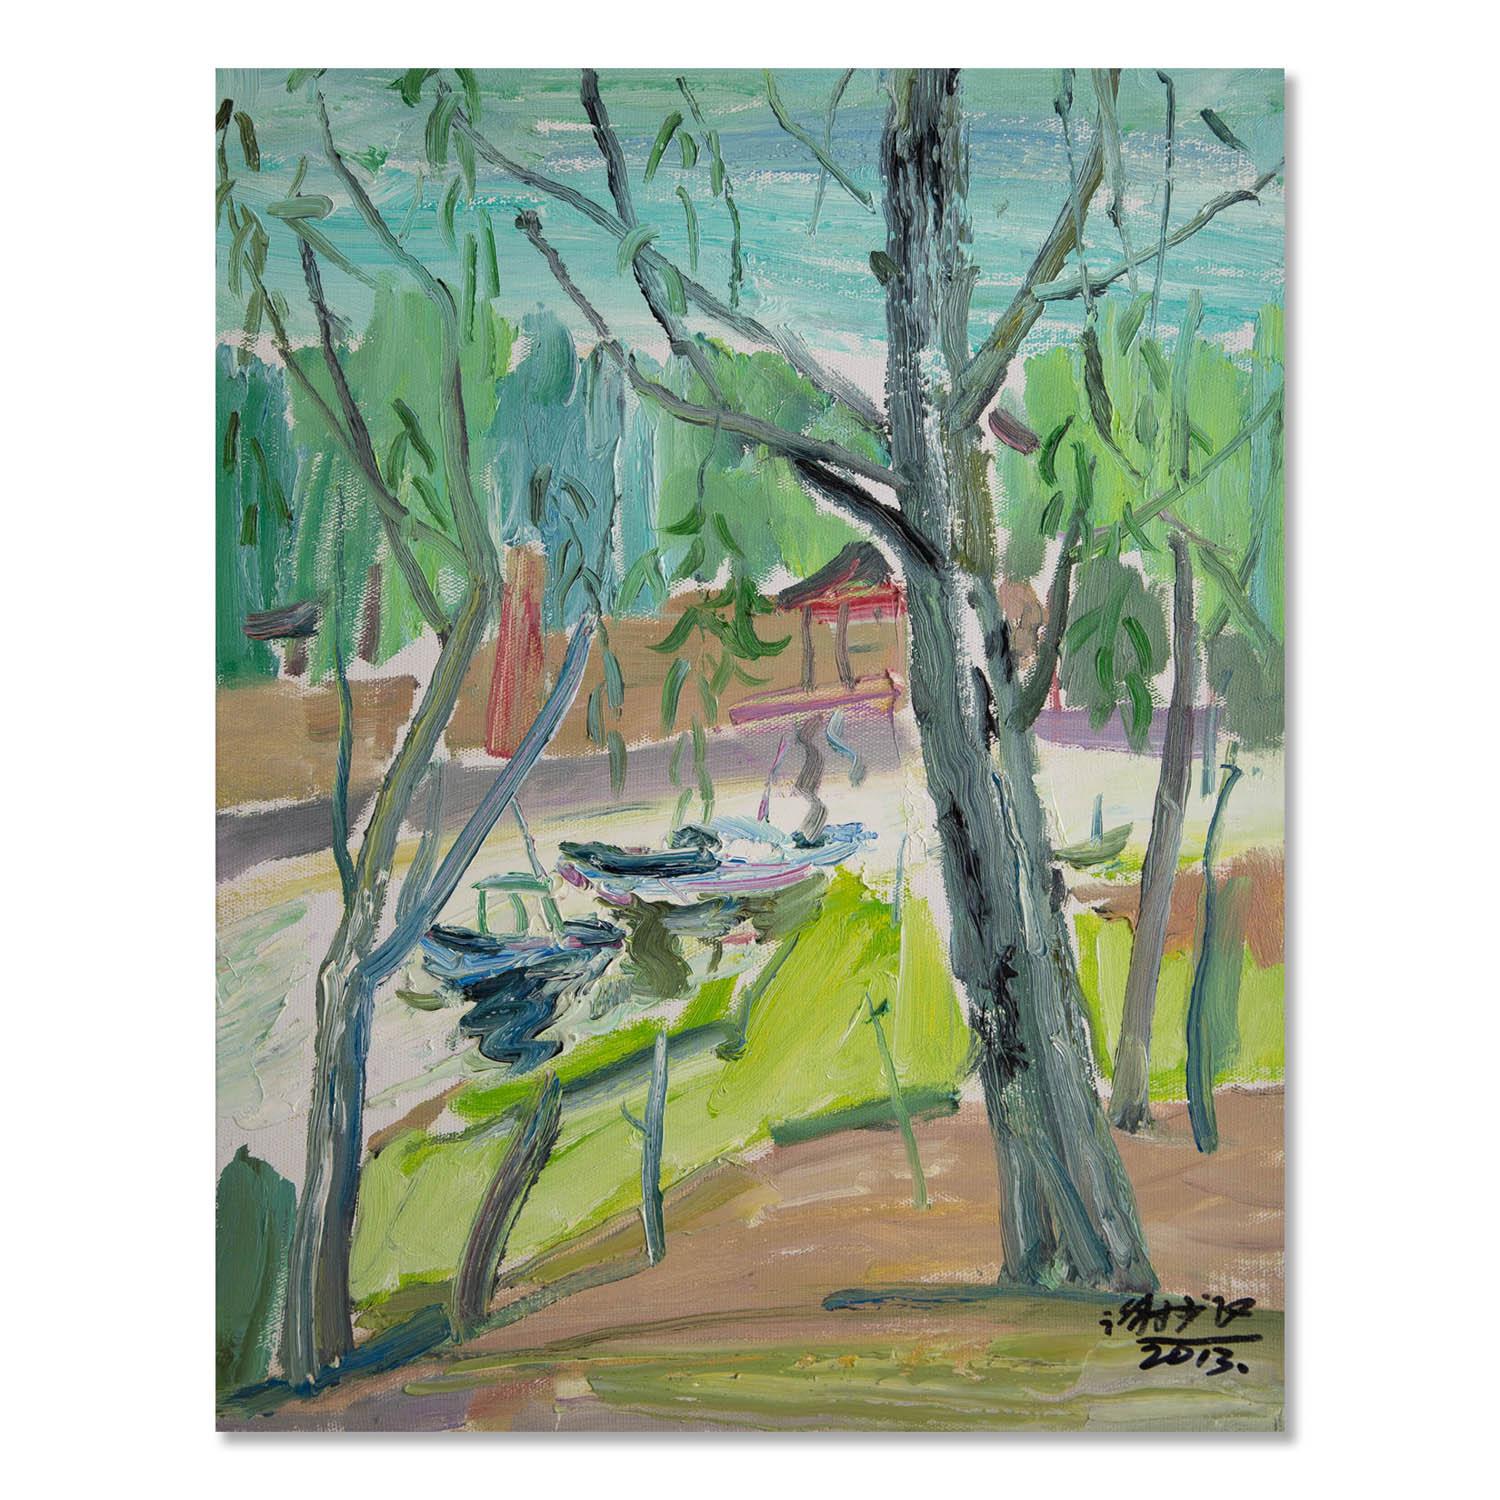  Title: Willow In Early Spring
 Medium: Oil on canvas
 Size: 19.5 x 15.5 inches
 Frame: Framing options available!
 Condition: The painting appears to be in excellent condition.
 
 Year: 2013
 Artist: Shaofei Xie
 Signature: Signed
 Signature